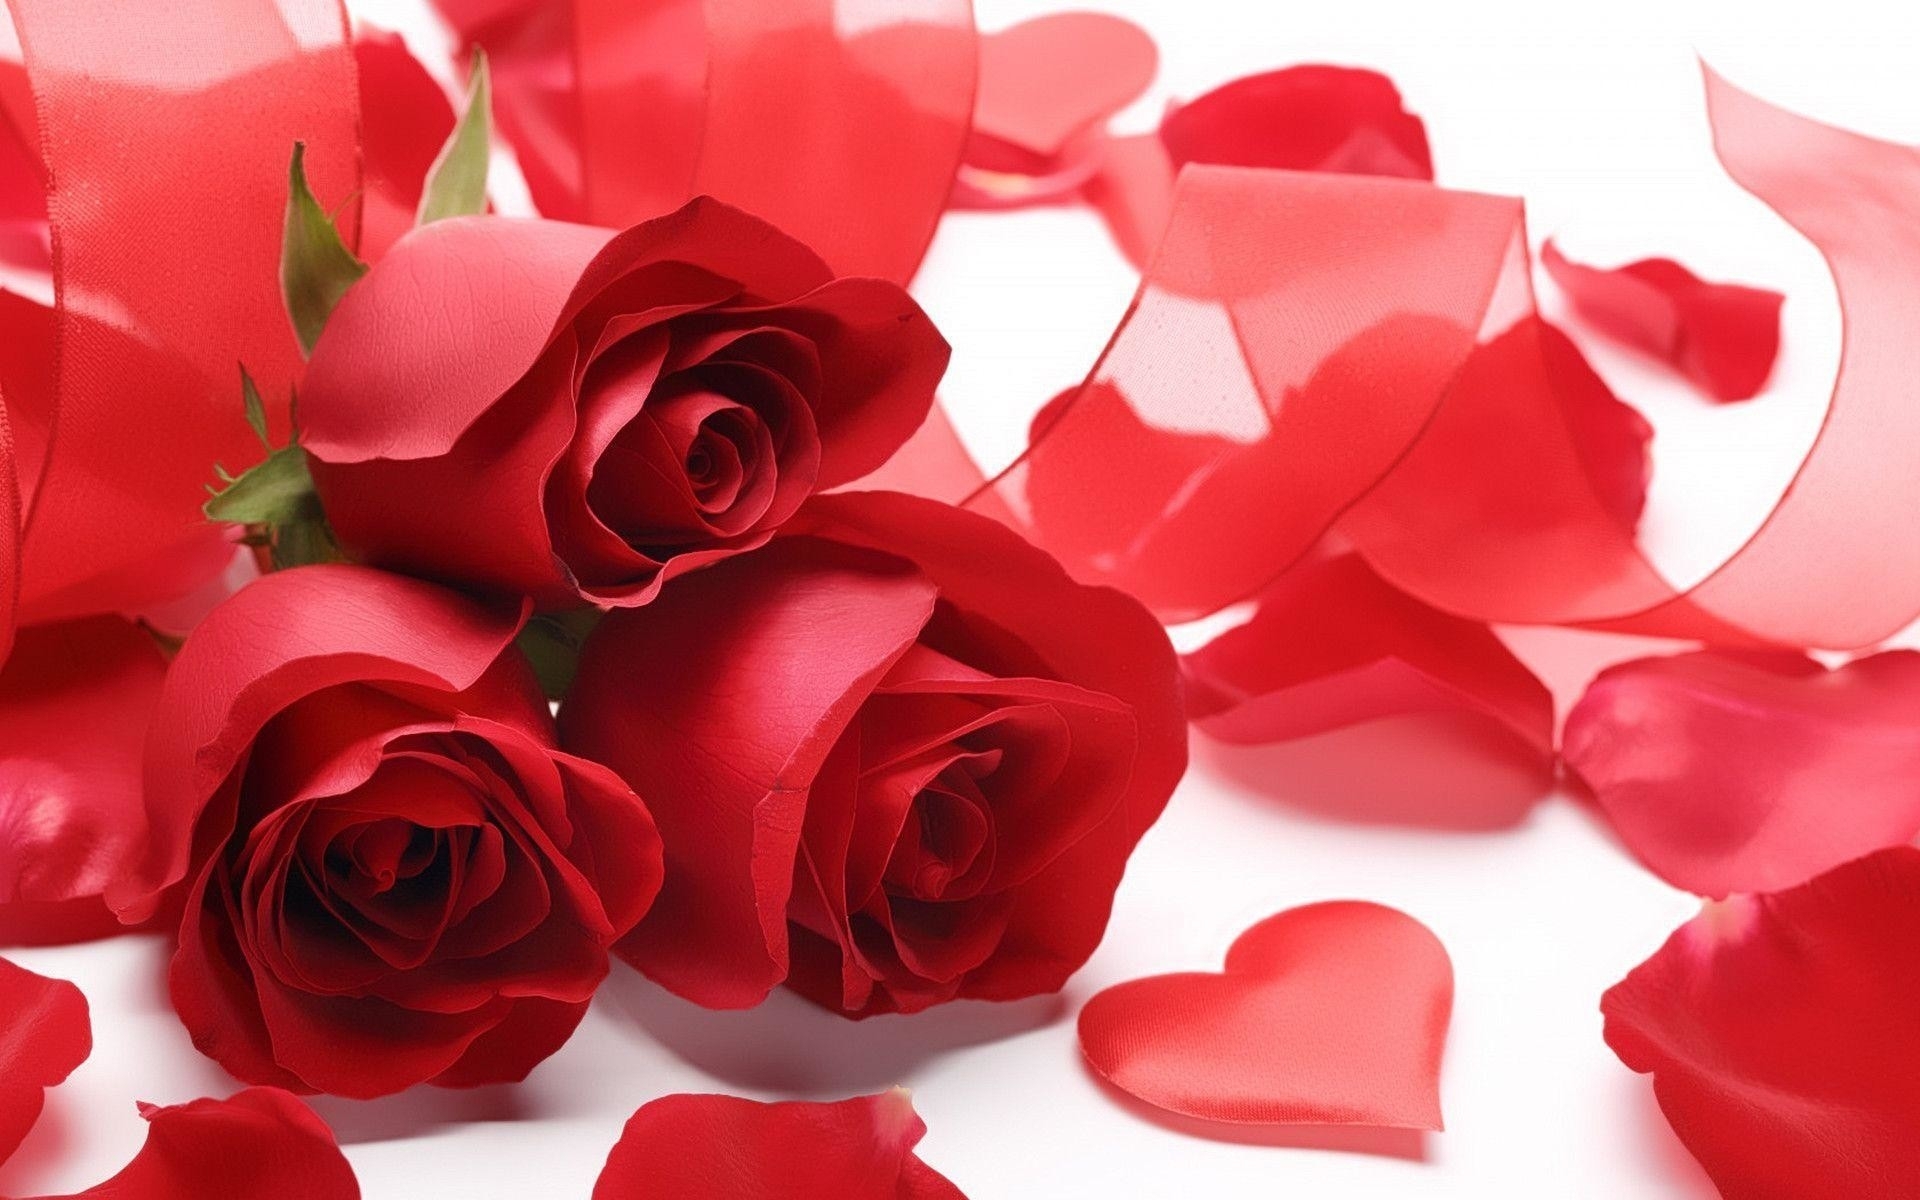 10 Top Roses And Hearts Wallpaper FULL HD 1920×1080 For PC Background